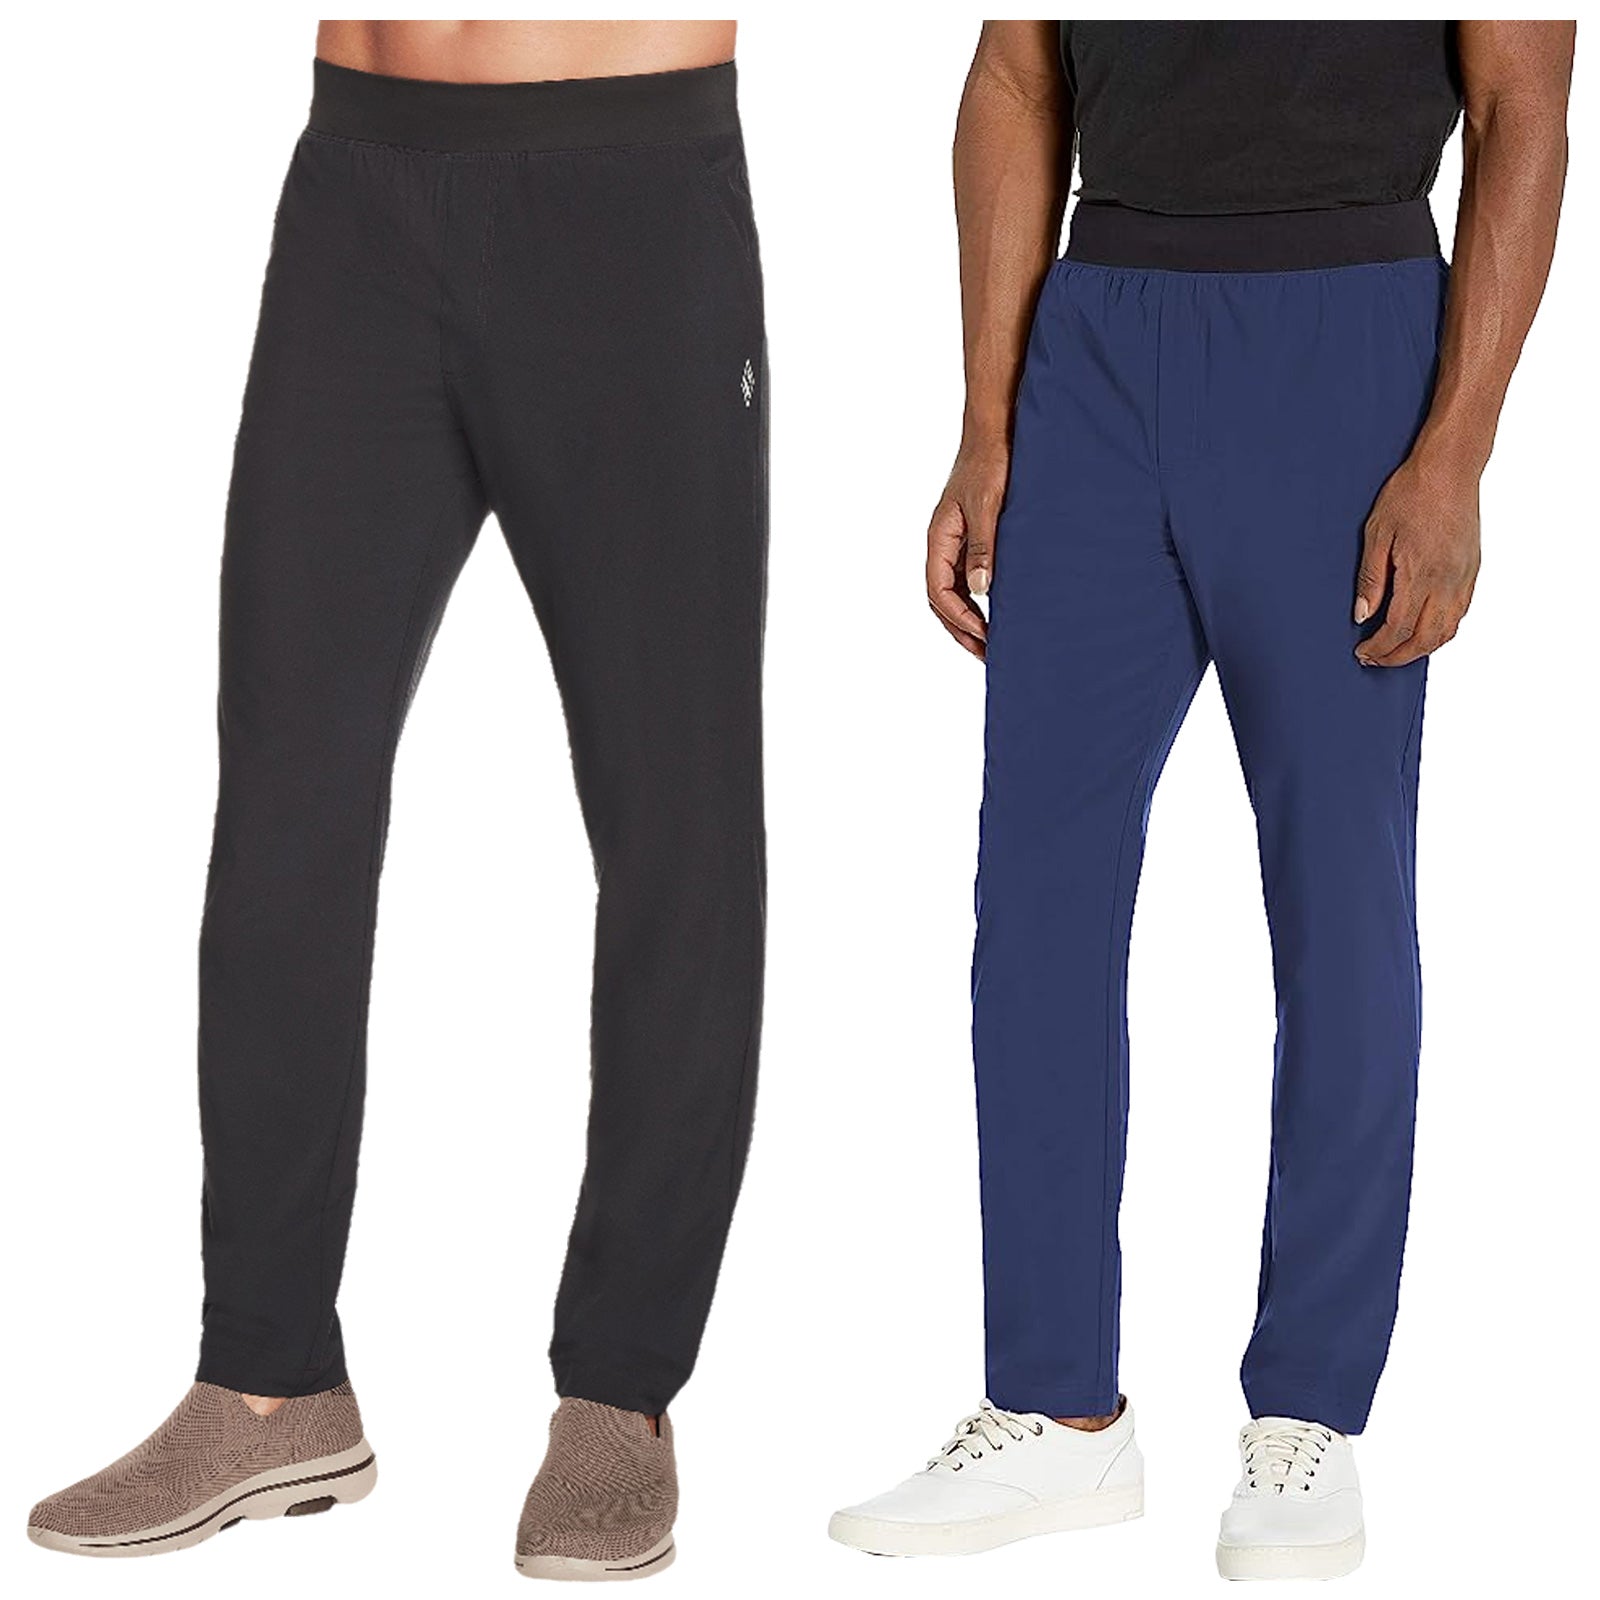 Skechers Mens Action Trousers – More Sports